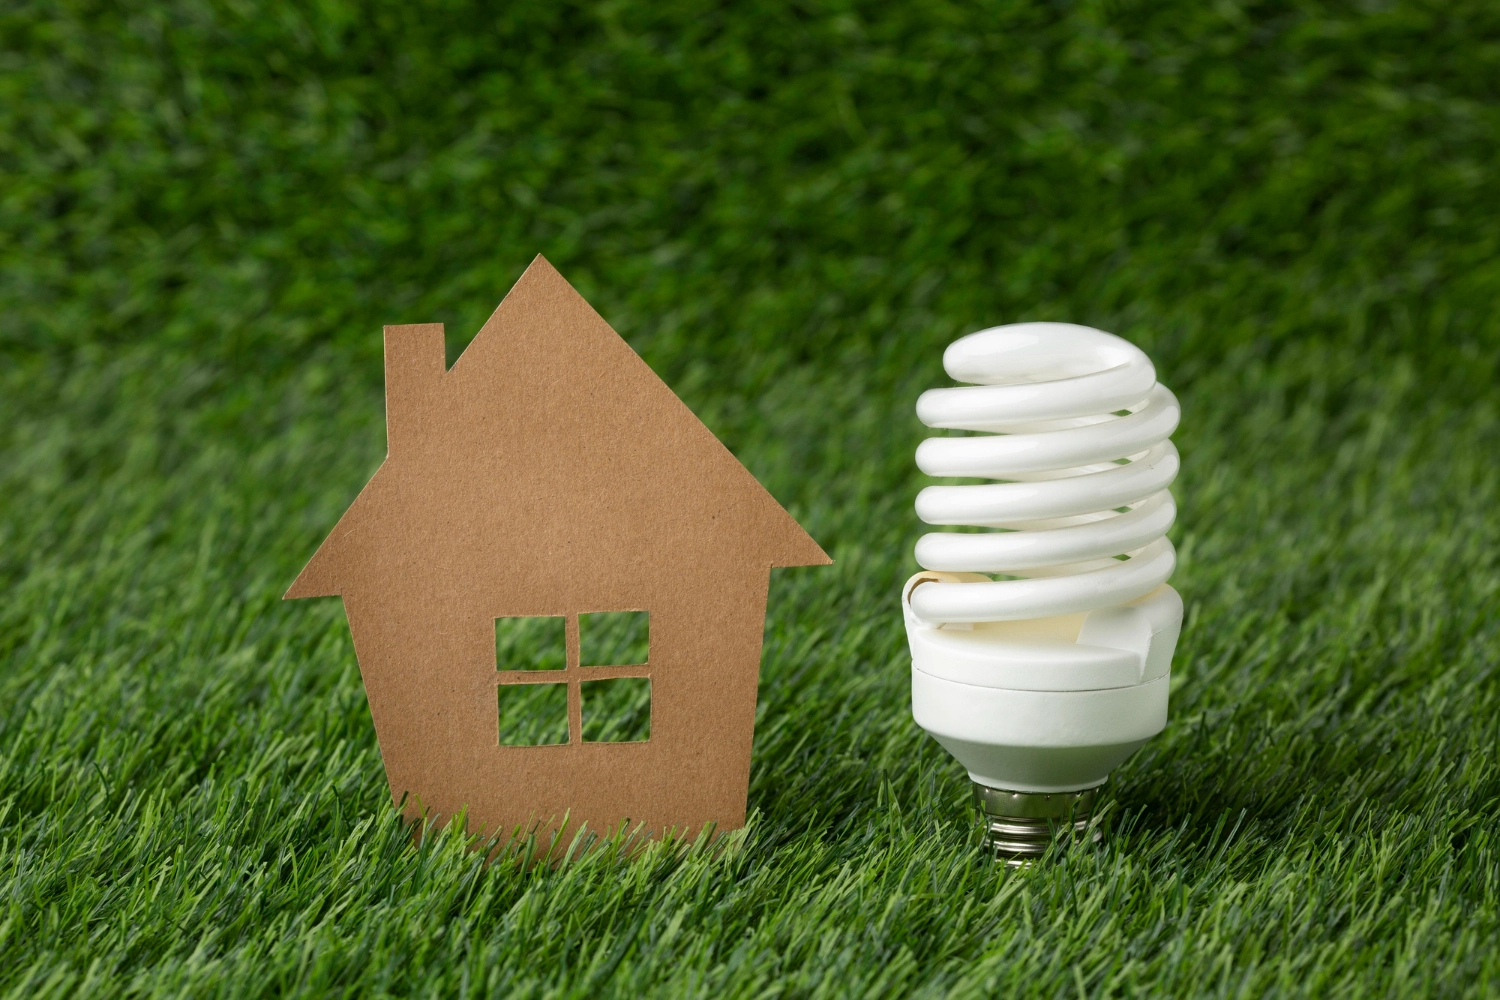 A cardboard cutout of a simple house with a window and a door is placed on a lush green grass background. Next to the house, a large energy-saving spiral CFL bulb stands, emphasizing eco-friendly energy solutions for homes.